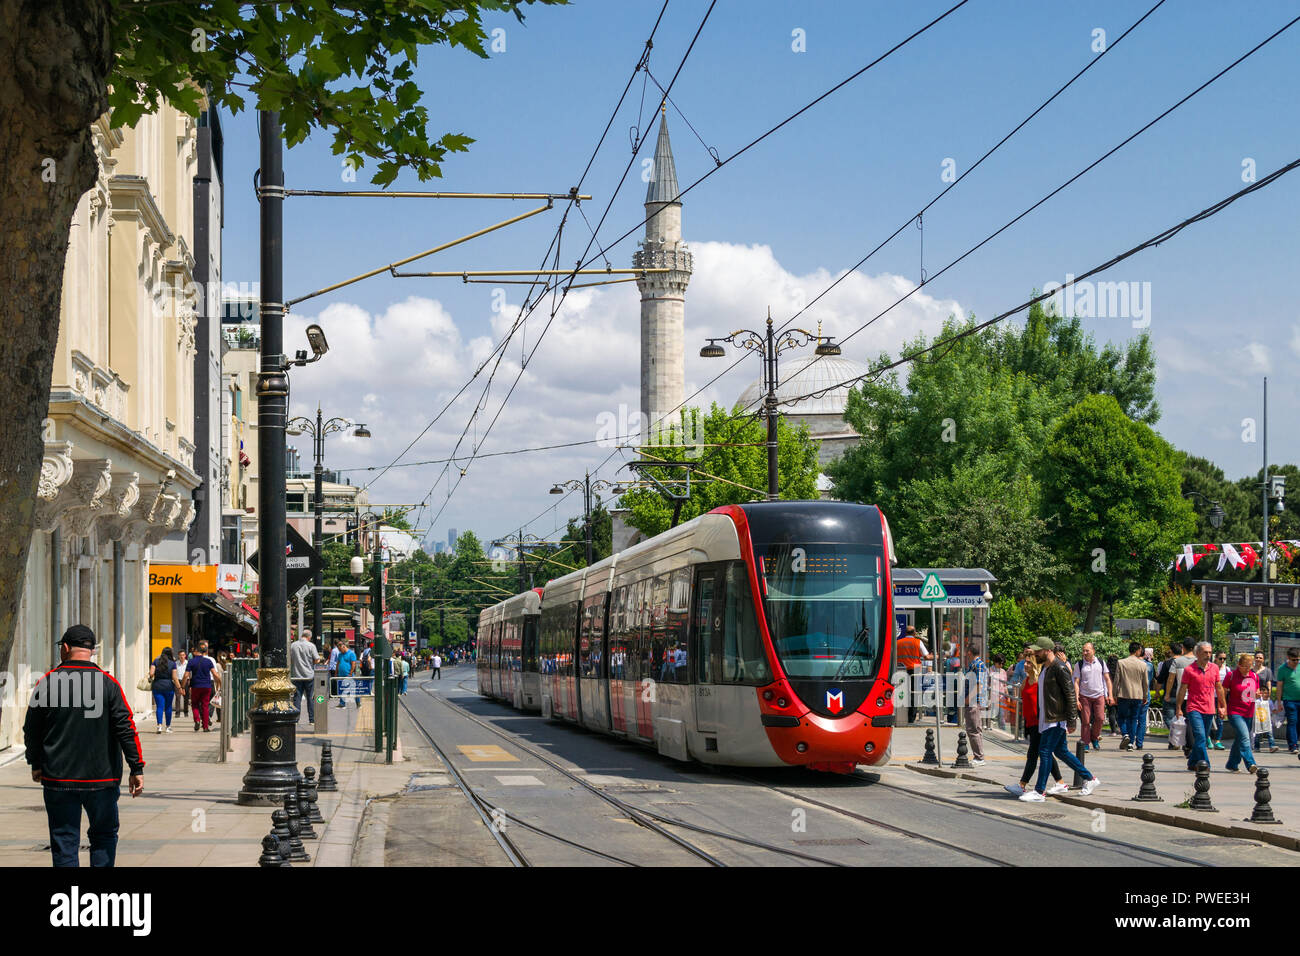 Sultanahmet tram station with tram at platform as people walk past, Istanbul, Turkey Stock Photo